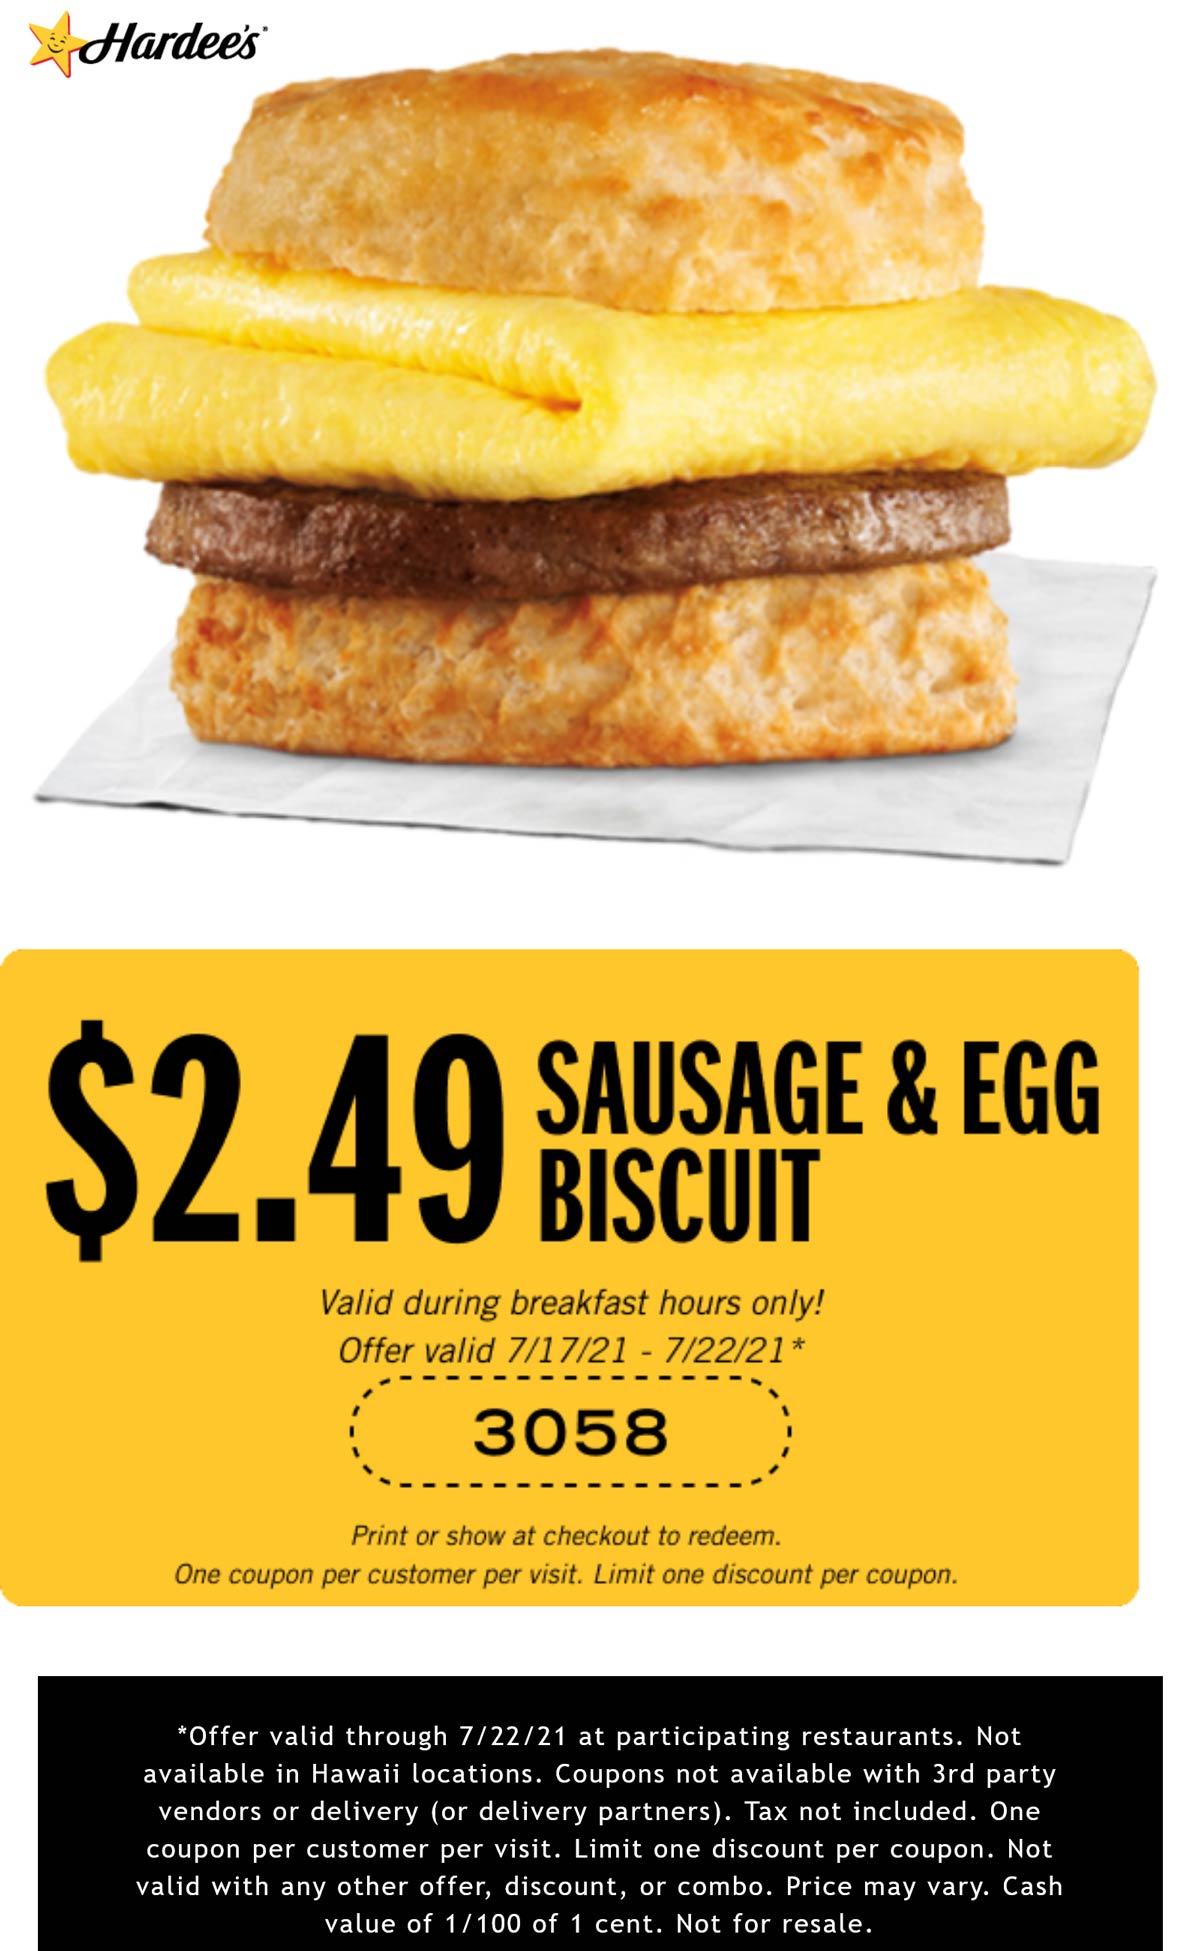 sausage-egg-breakfast-biscuit-for-2-49-at-hardees-hardees-the